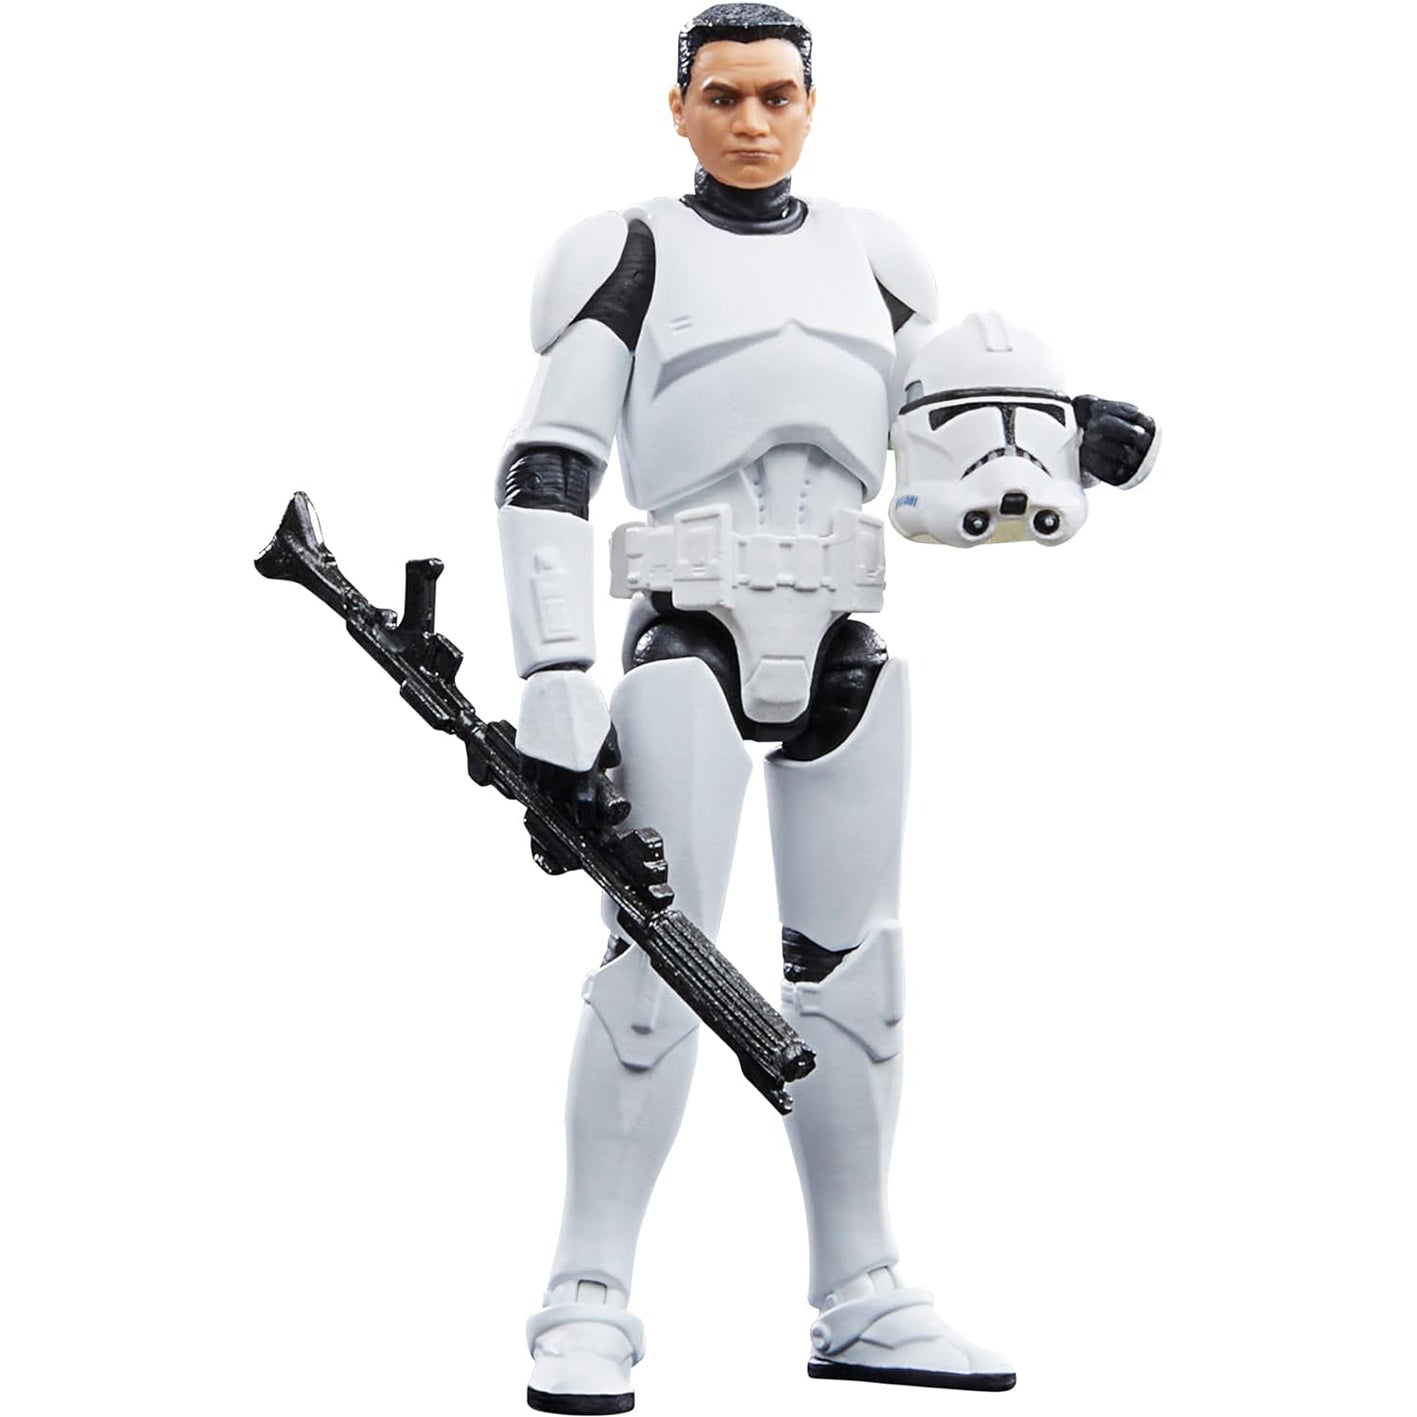 Clone Trooper (Phase II Armor), Star Wars: The Vintage Collection